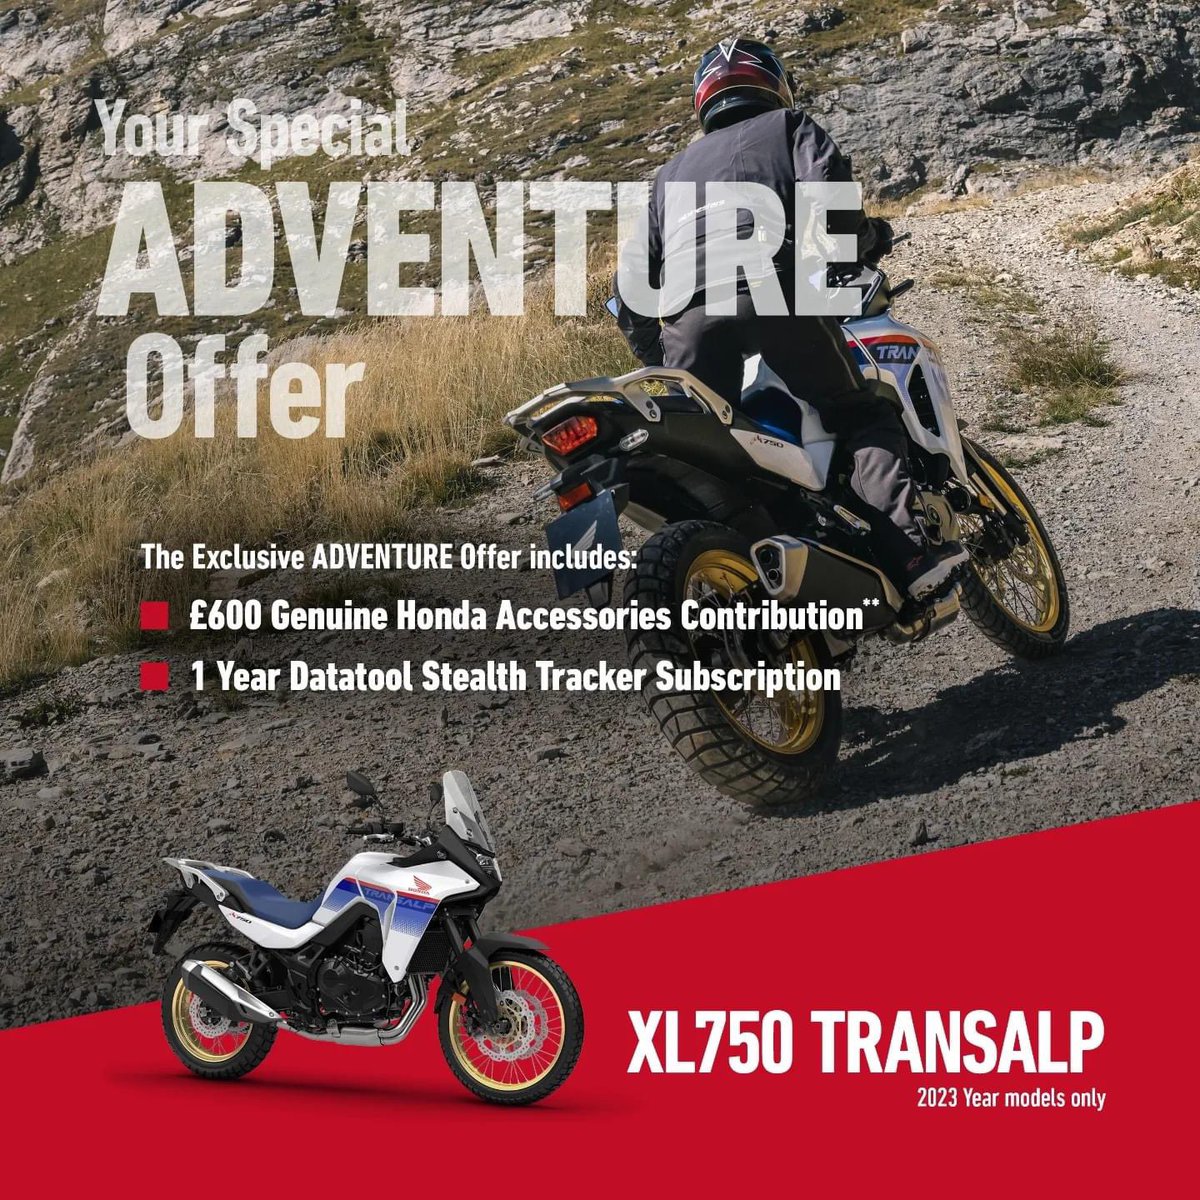 Honda’s brand new #Transalp is the latest addition to their model lineup. It was launched last year to a an audience who had high hopes! Boy did Honda deliver. We now have stock available in all 3 colours and are offering £600 to spend on accessories with each one #WeAreBikers